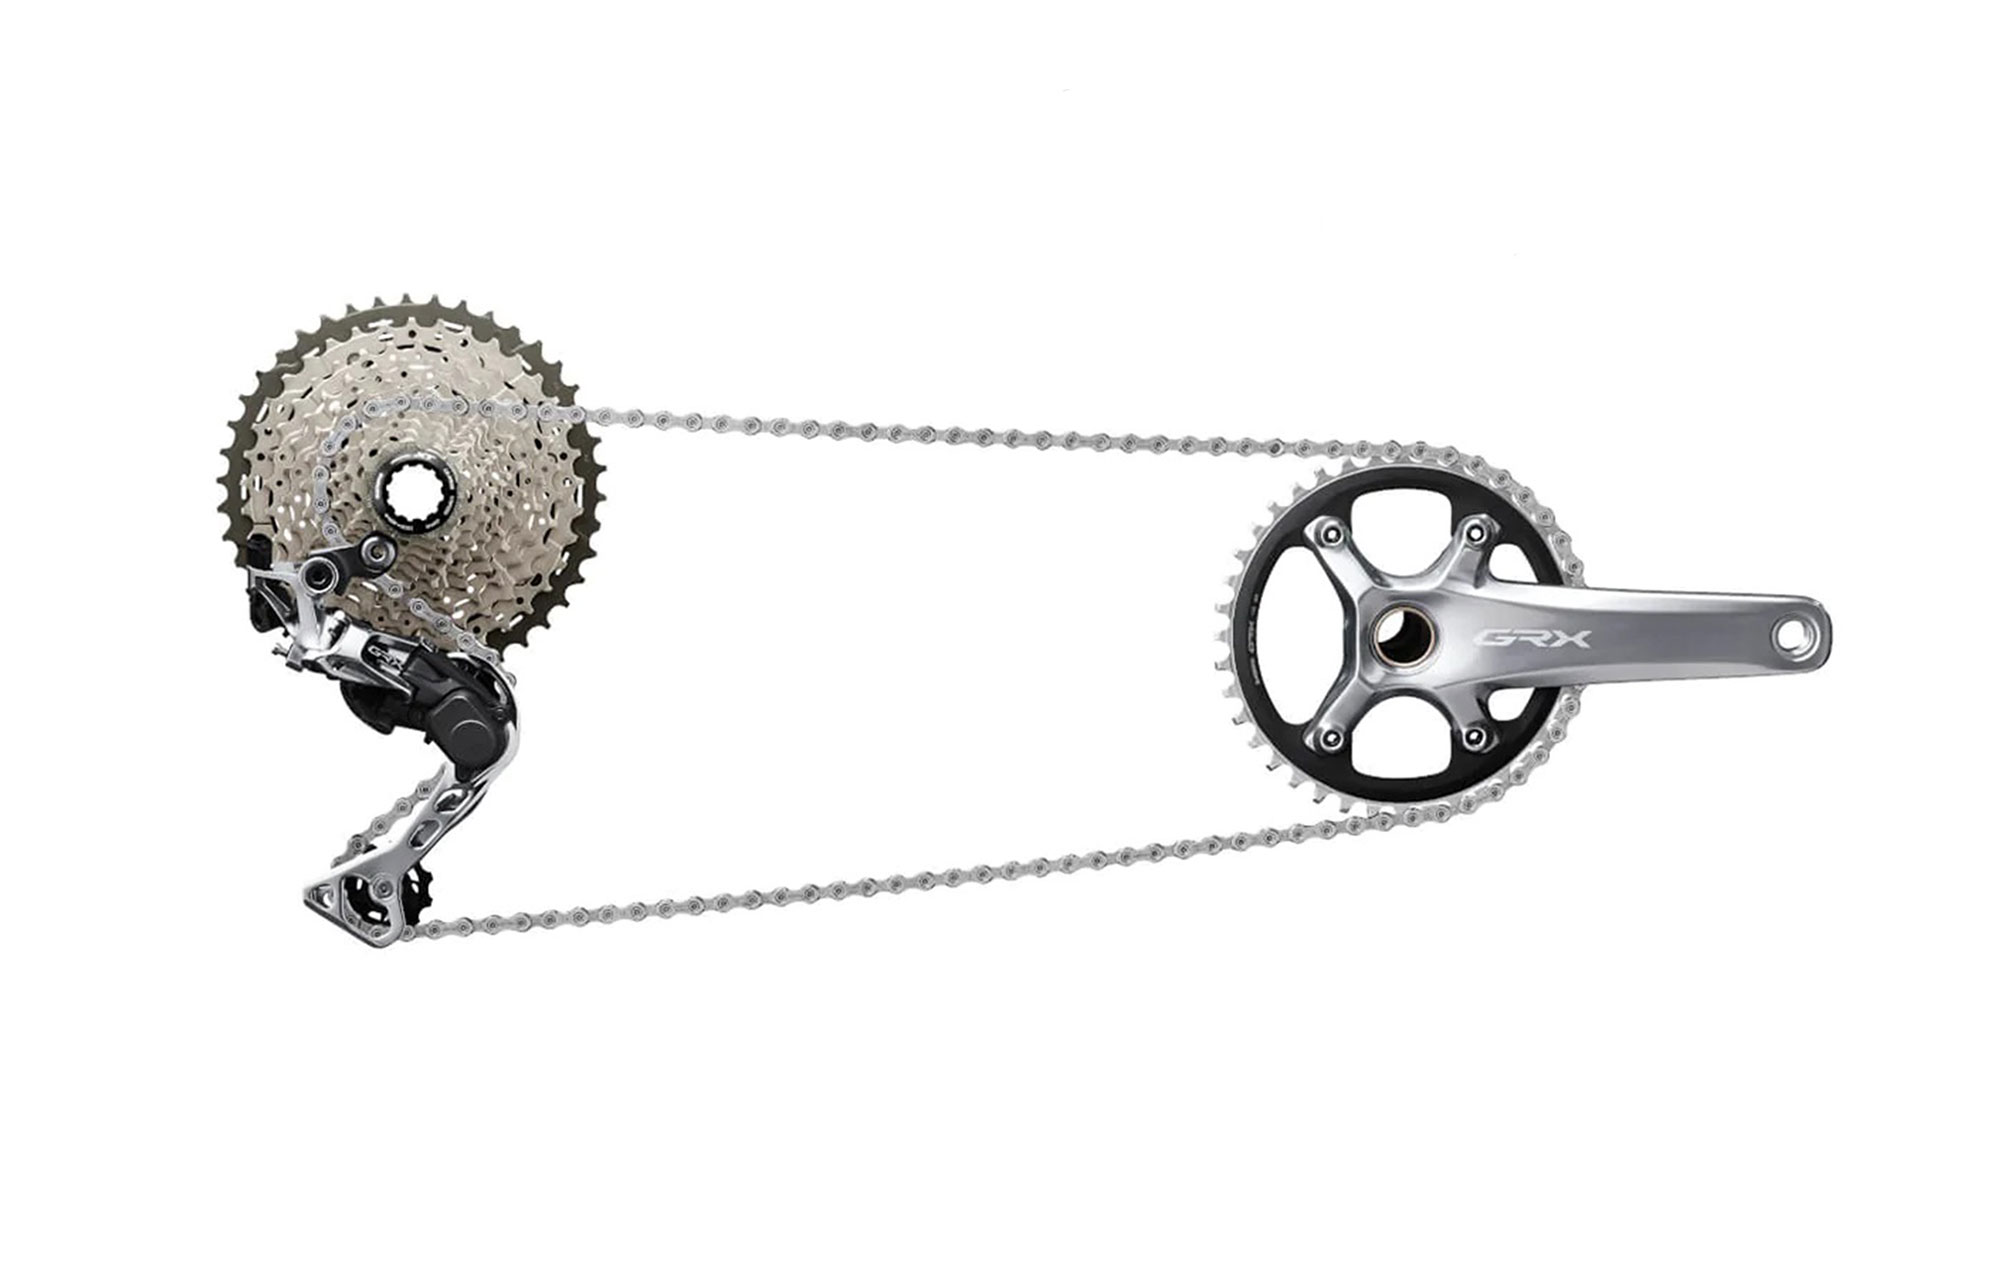 Shimano GRX Limited 1x11 Groupset